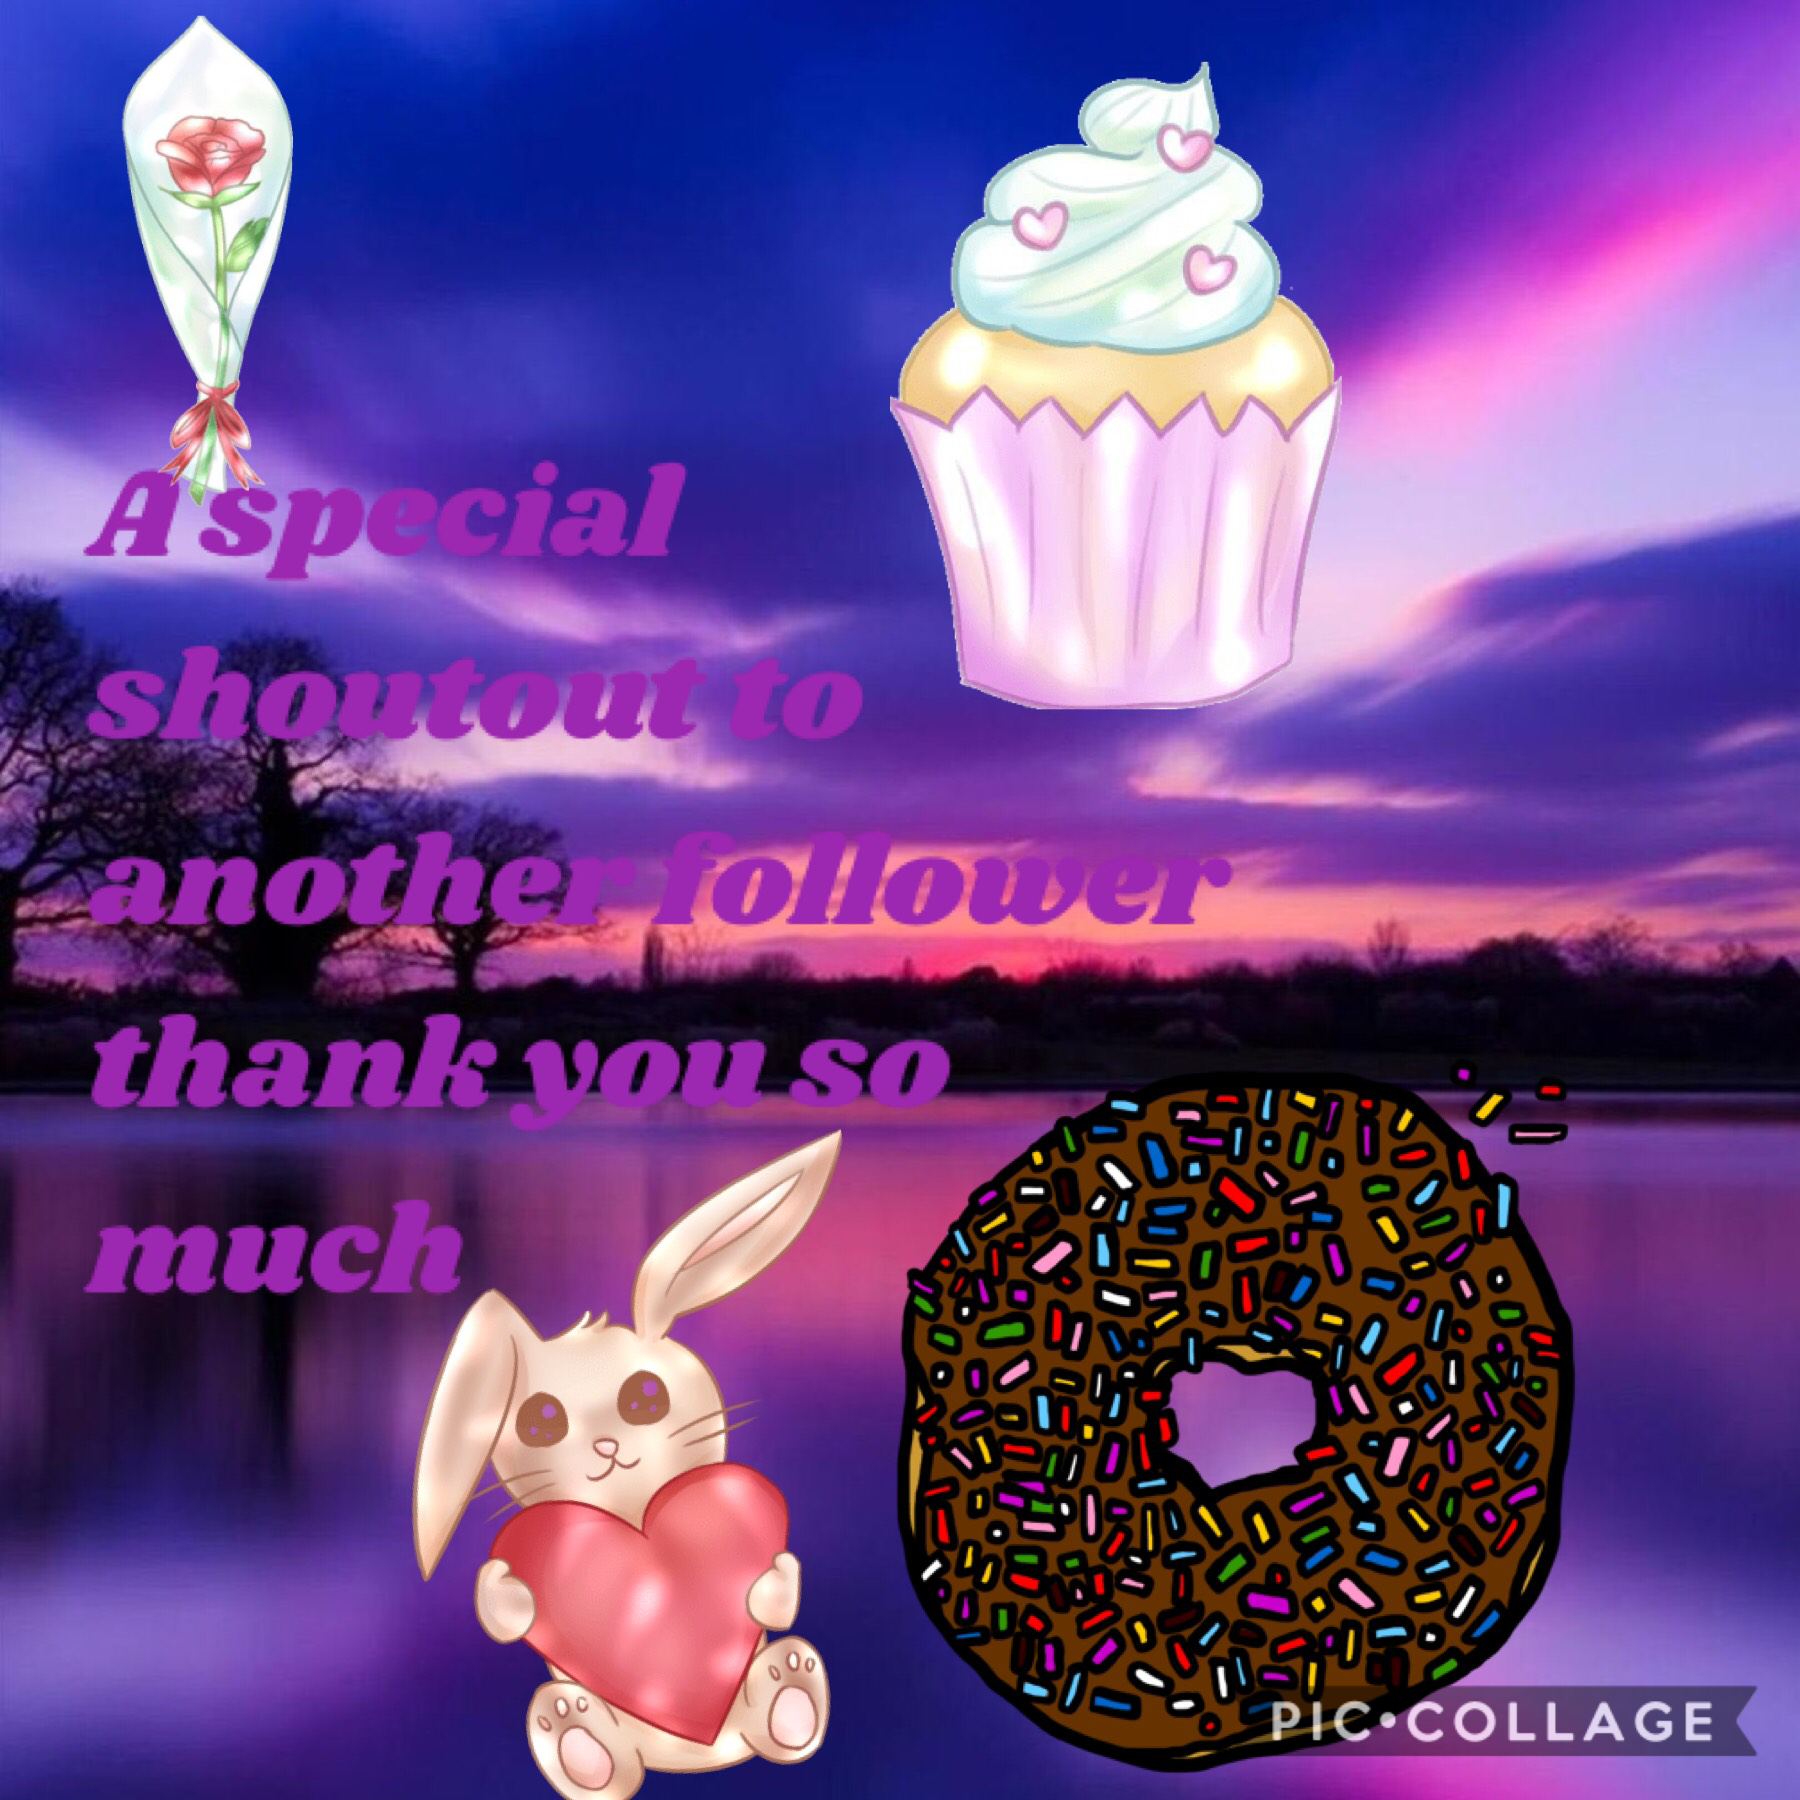 Thank you so much for 35 followers 